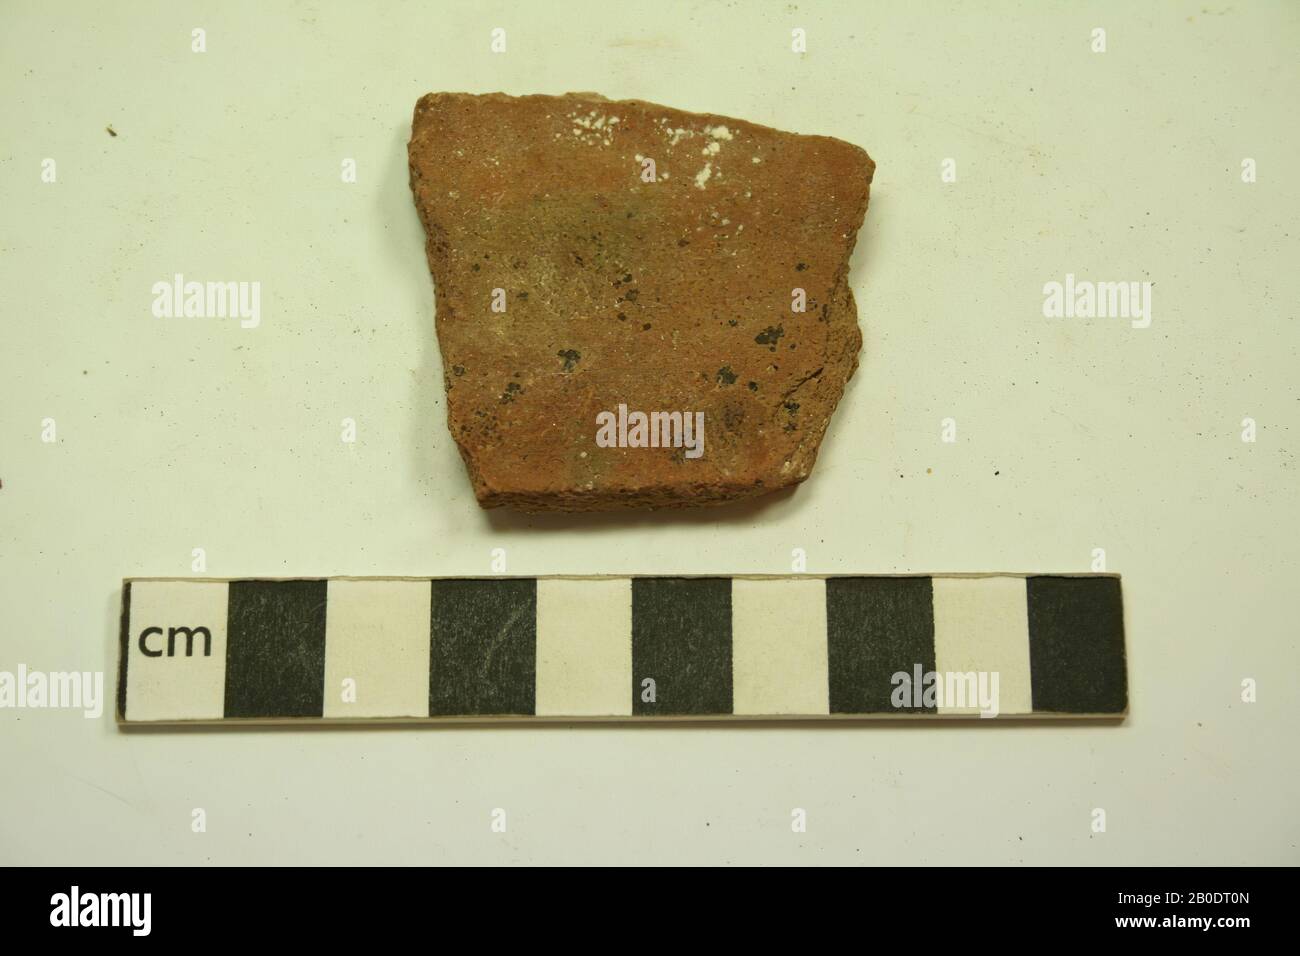 Egypt, shard, earthenware, 5 x 5 cm thick 5 mm, Meroitic Period, 2nd-4th century A.D, Egypt Stock Photo